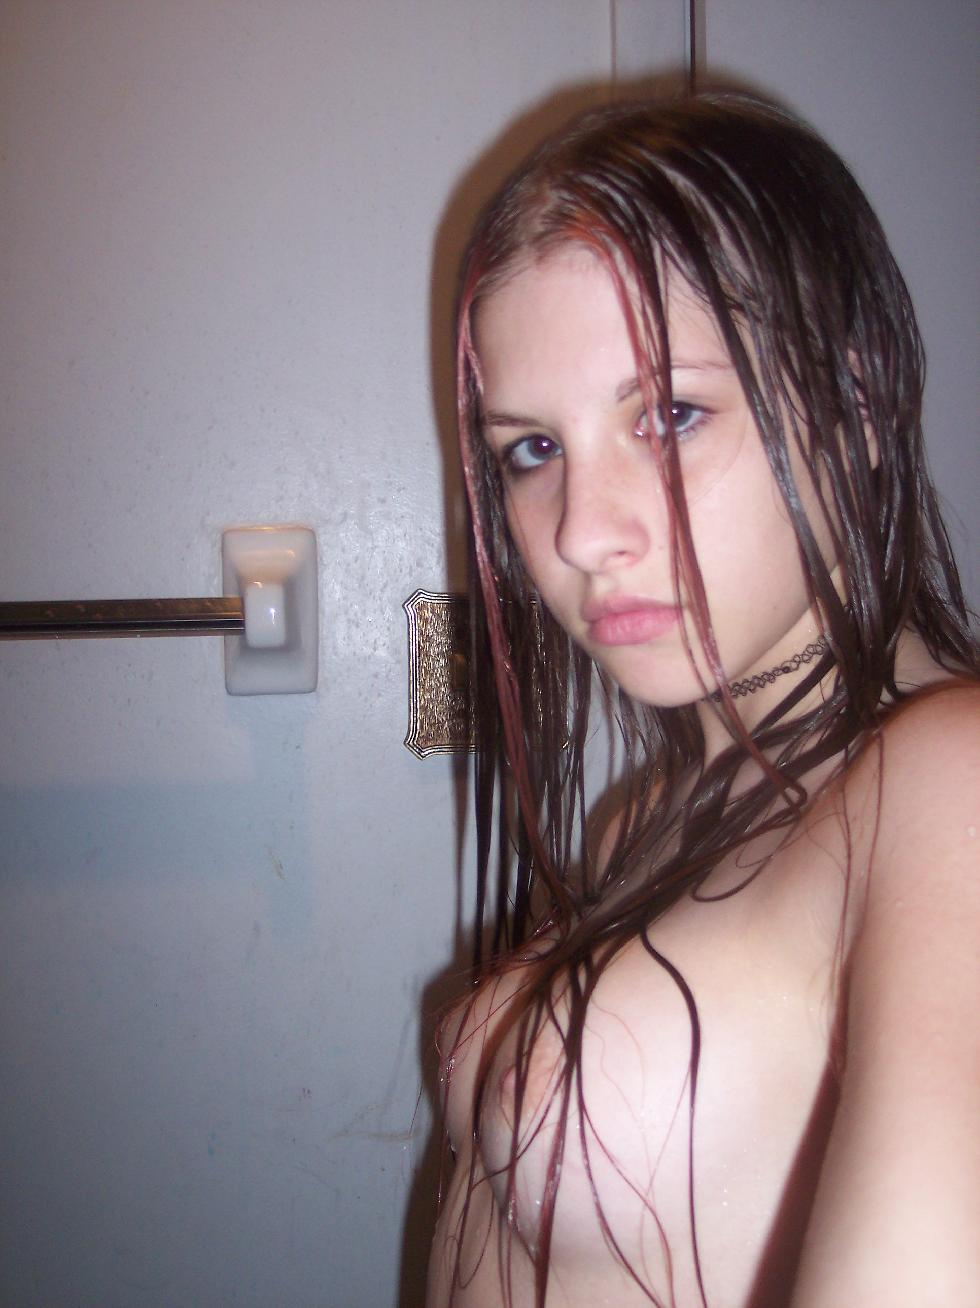 Young naked girl is taking a bath - Tina - 18